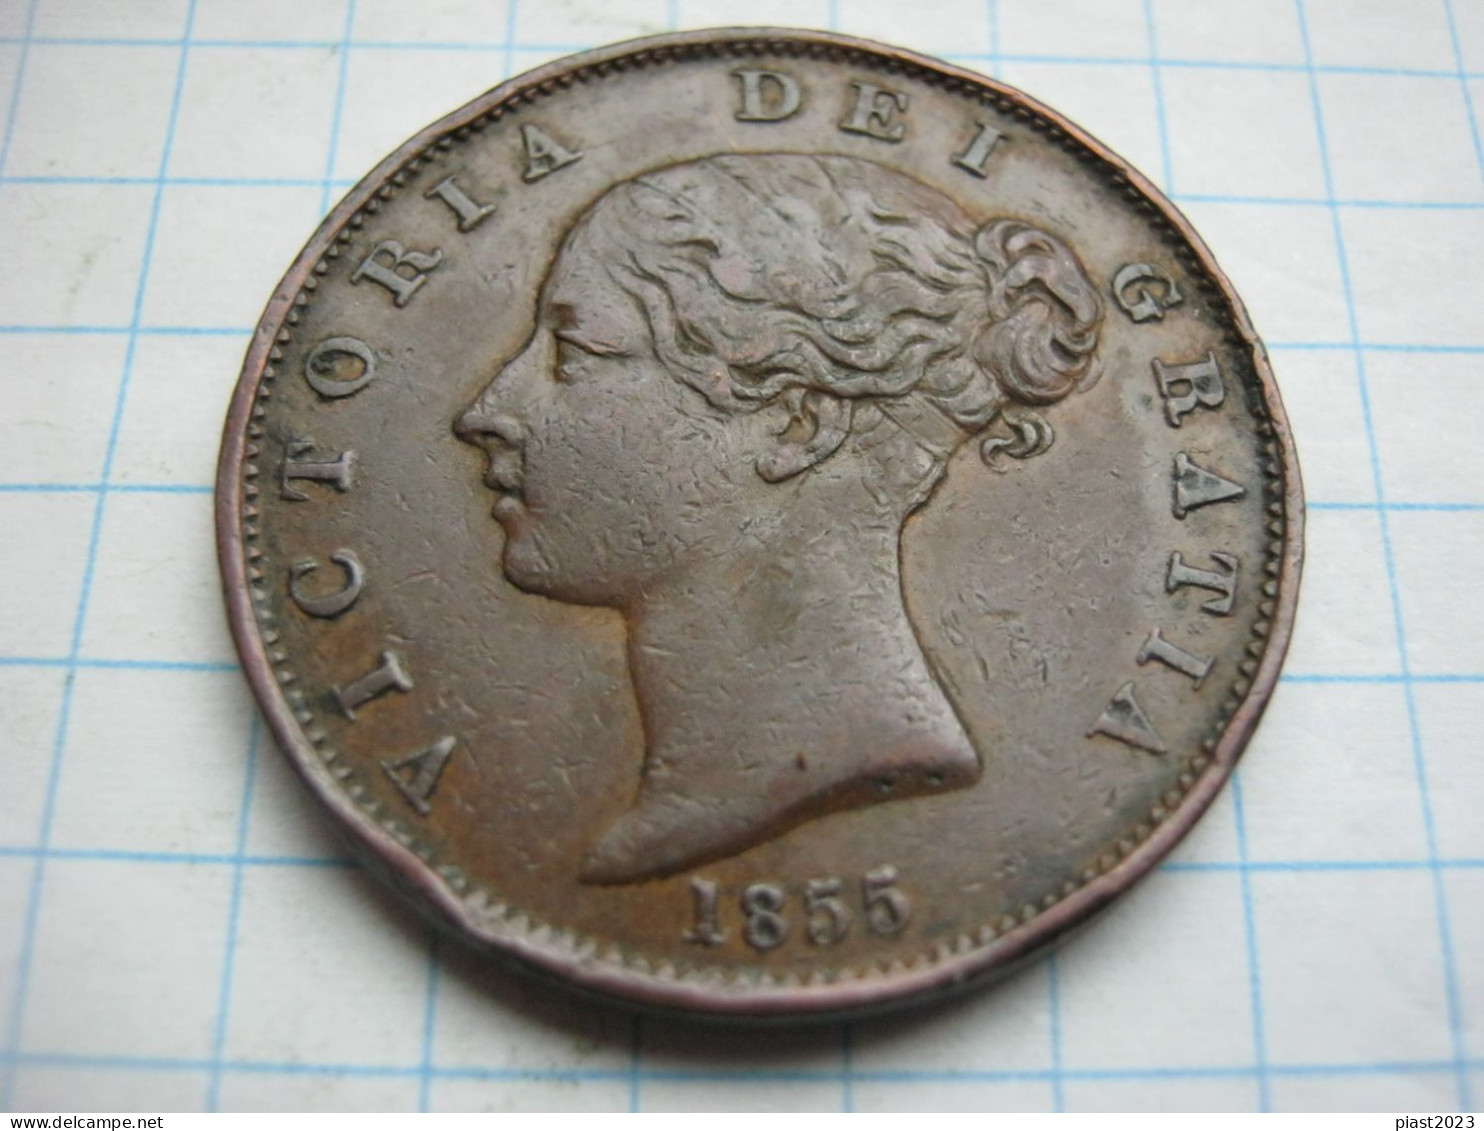 Great Britain 1/2 Penny 1855 - C. 1/2 Penny